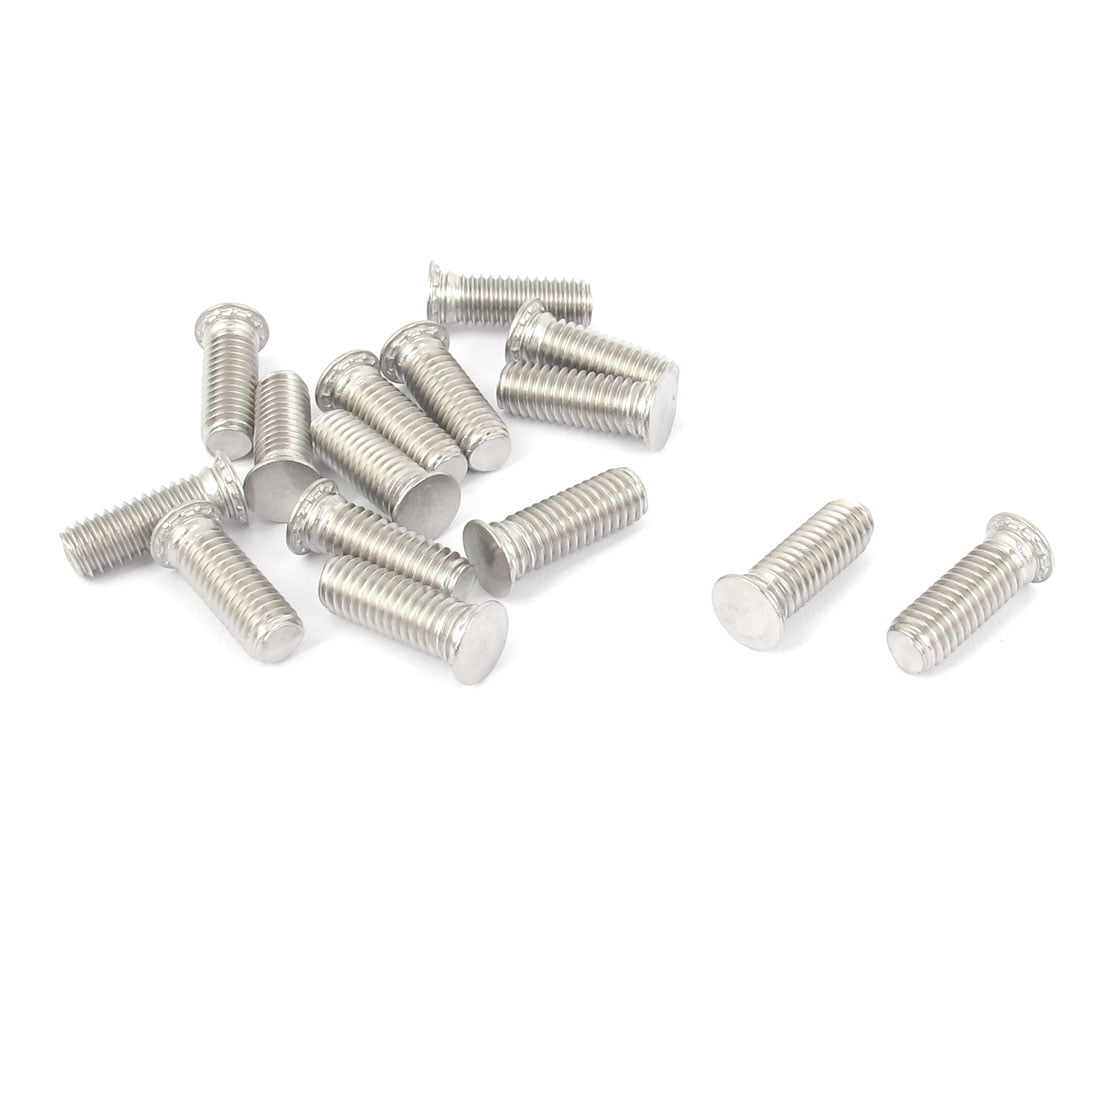 5a6135ee-a222-11e9-8d7c-4cedfbbbda4e X-DREE M6x12mm Flush Head Stainless Steel Self Clinching Threaded Studs Fastener 15pcs